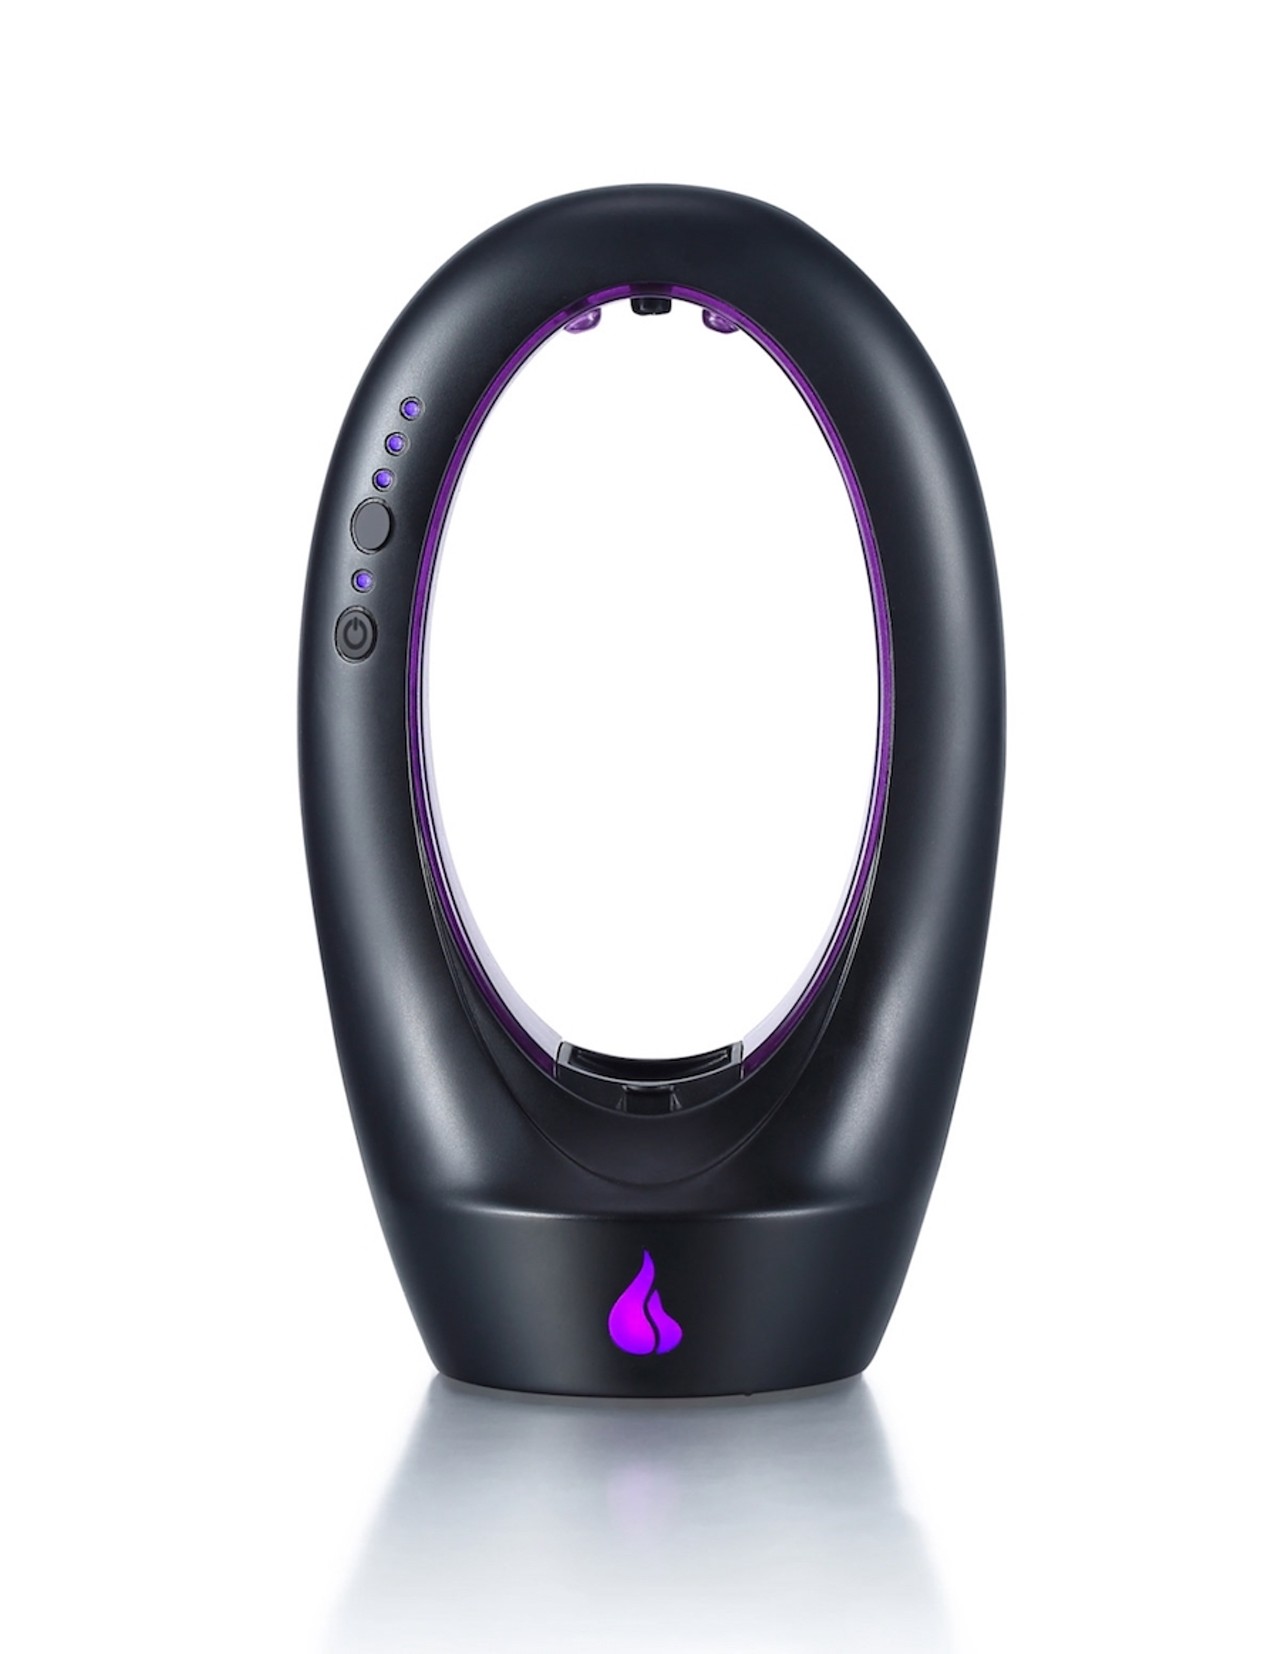 For those who see the value in treating themselves &#151; and lubing up
Touch Lubricant Warmer, $119
Lover's Lane, various locations, loverslane.com 
We sure have come a long way from digging our hands in a crusty jar of Vaseline to lube up for solo or partnered sexy time. Never again will you spit in your hand or interrupt the session to, like, grab a slippery-ass bottle, which will absolutely make a gross squirty sound. The future is now, thanks to the hands-free Touch Lubricant Warmer, which is an automated heating dispenser for your lube of choice, with three dispensing options. Did we mention that it heats the lube so you don't startle your genitals? They're very jumpy. 
Photo via  loverslane.com